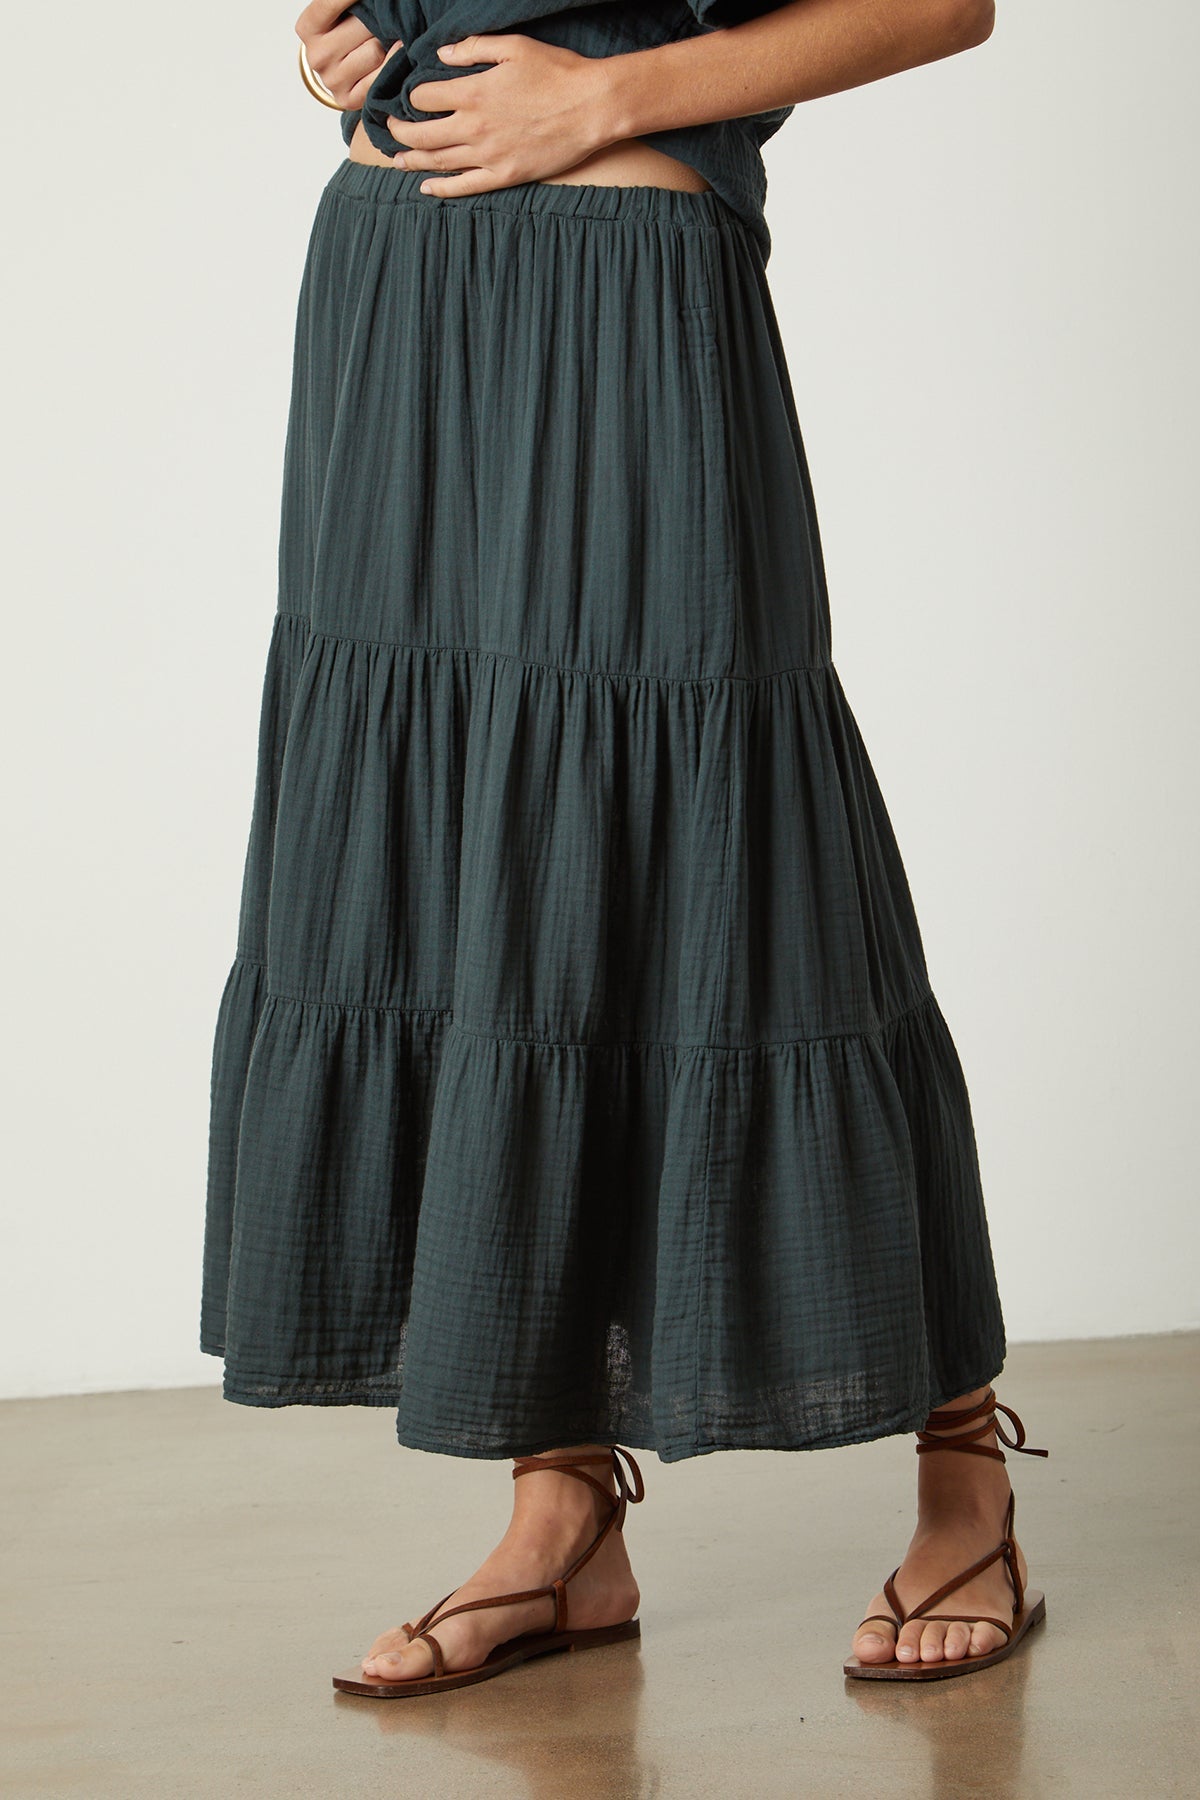   A woman wearing a Velvet by Graham & Spencer Danielle Cotton Gauze Tiered Skirt and sandals. 